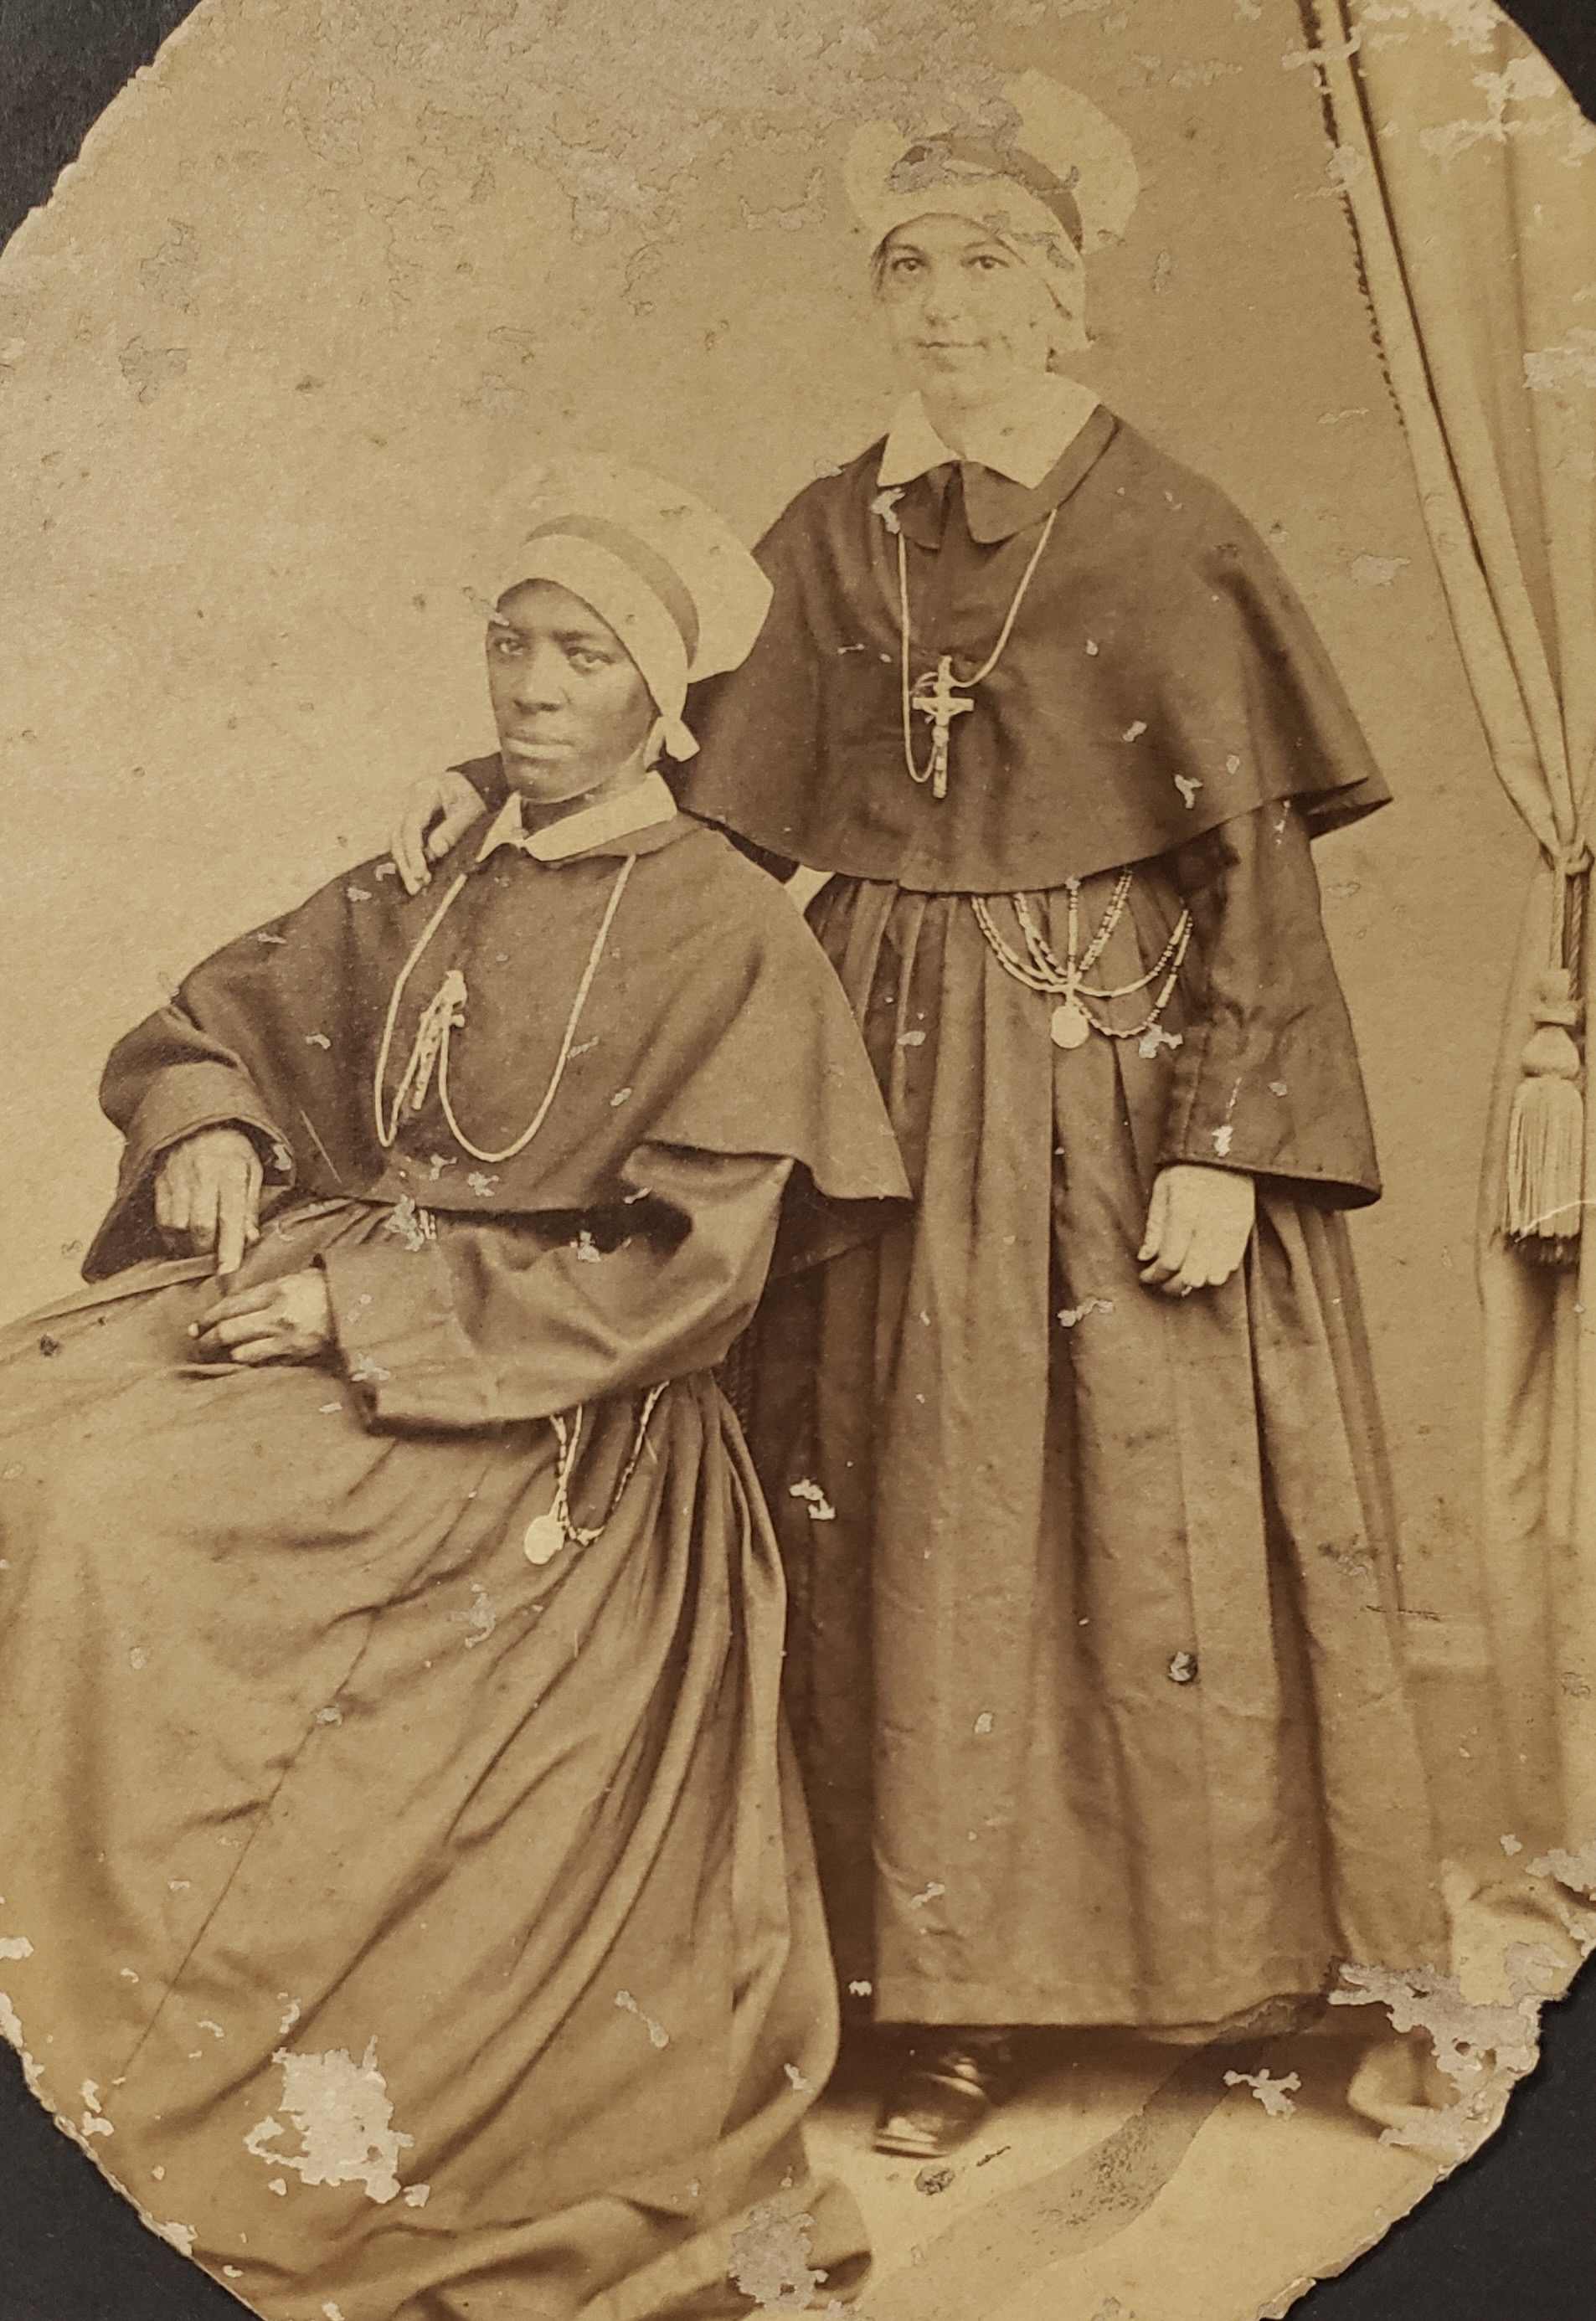 Sister M. Theodore Riley (seated) and Sister Virginia Reister (standing), c. 1860s